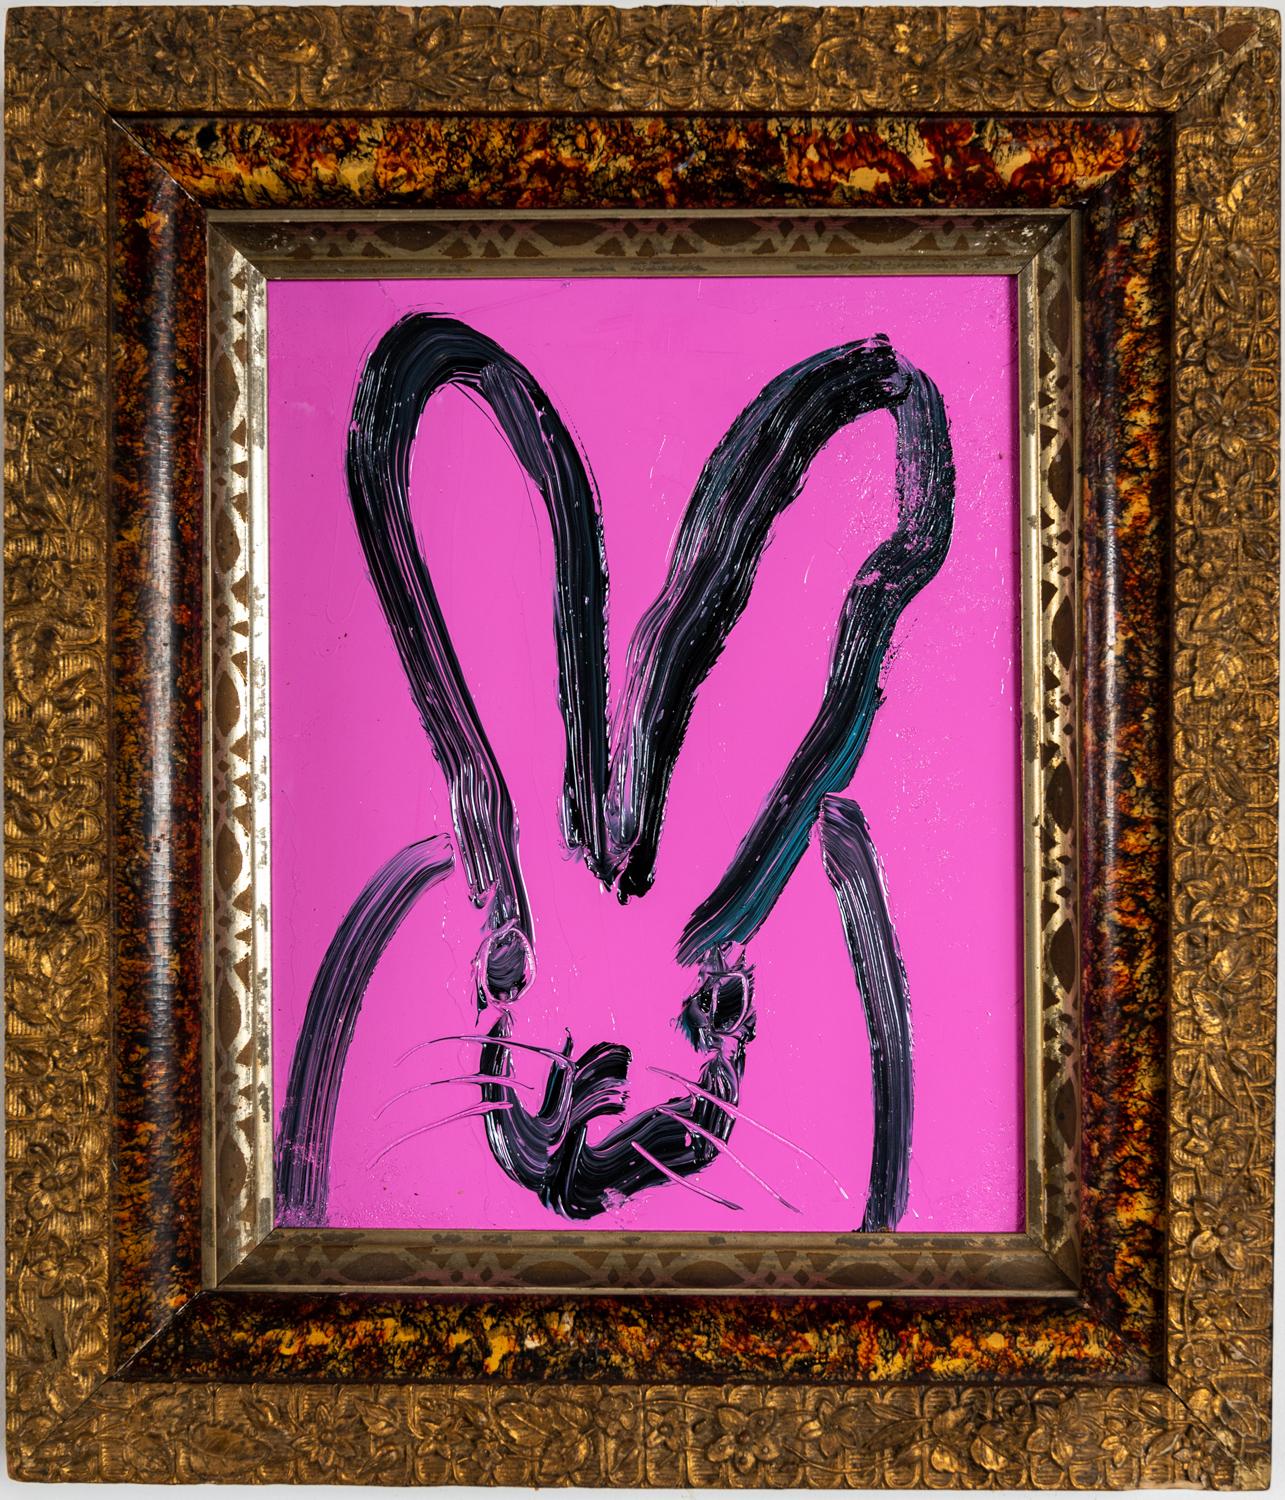 Hunt Slonem Animal Painting - "Mist" Pink Bunny Oil Painting in Gold and Wood Vintage Frame